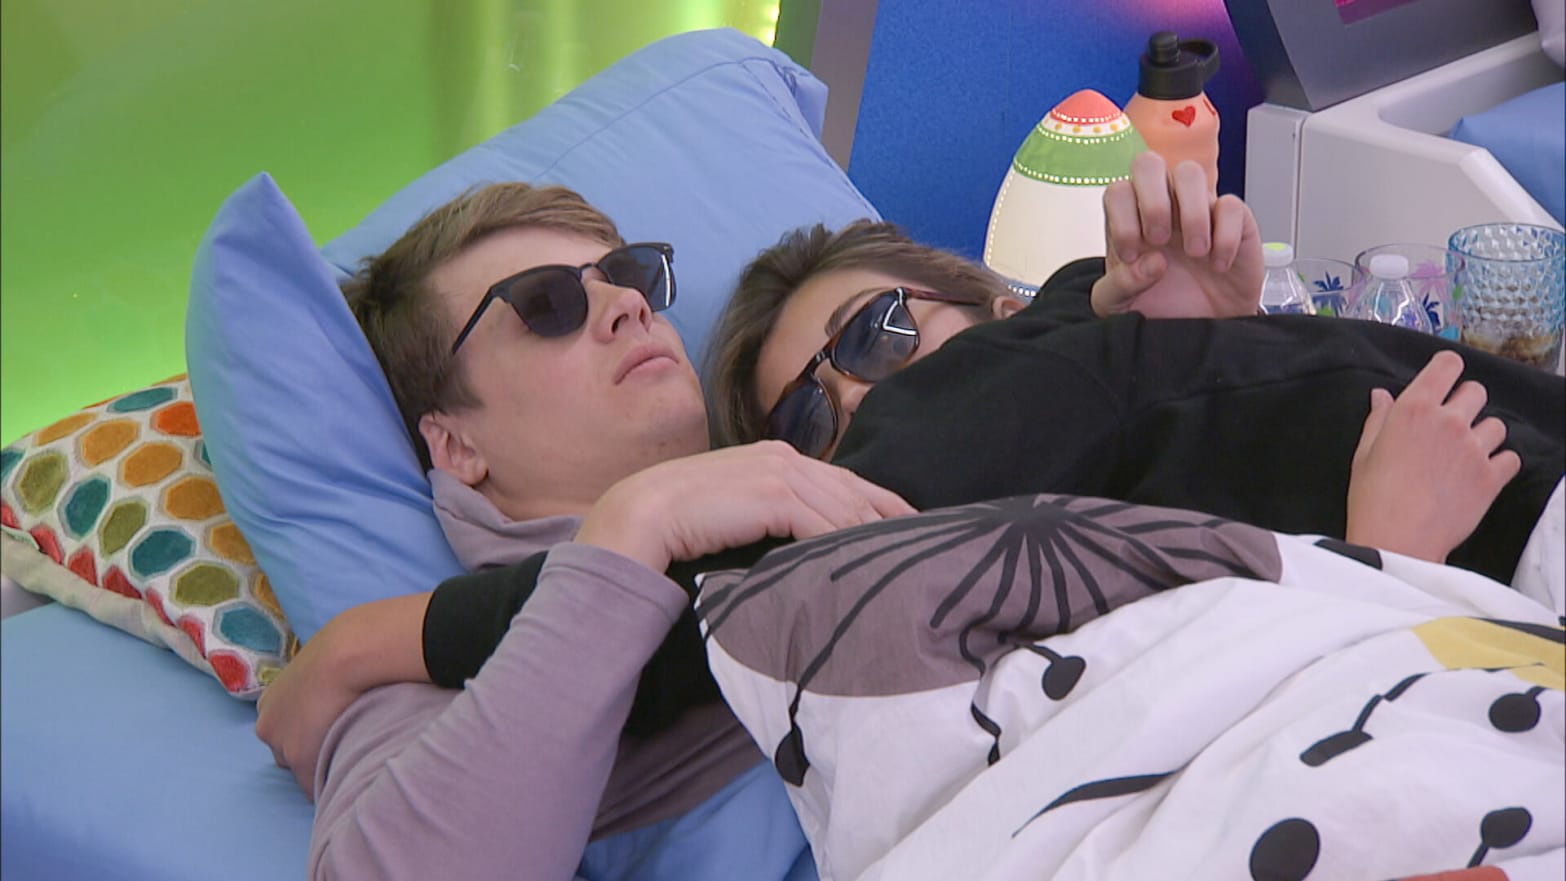 Sex While Sleeping Porn - Big Brother' Kyle and Alyssa Having Sex on Pool Floats Scarred Me for Life